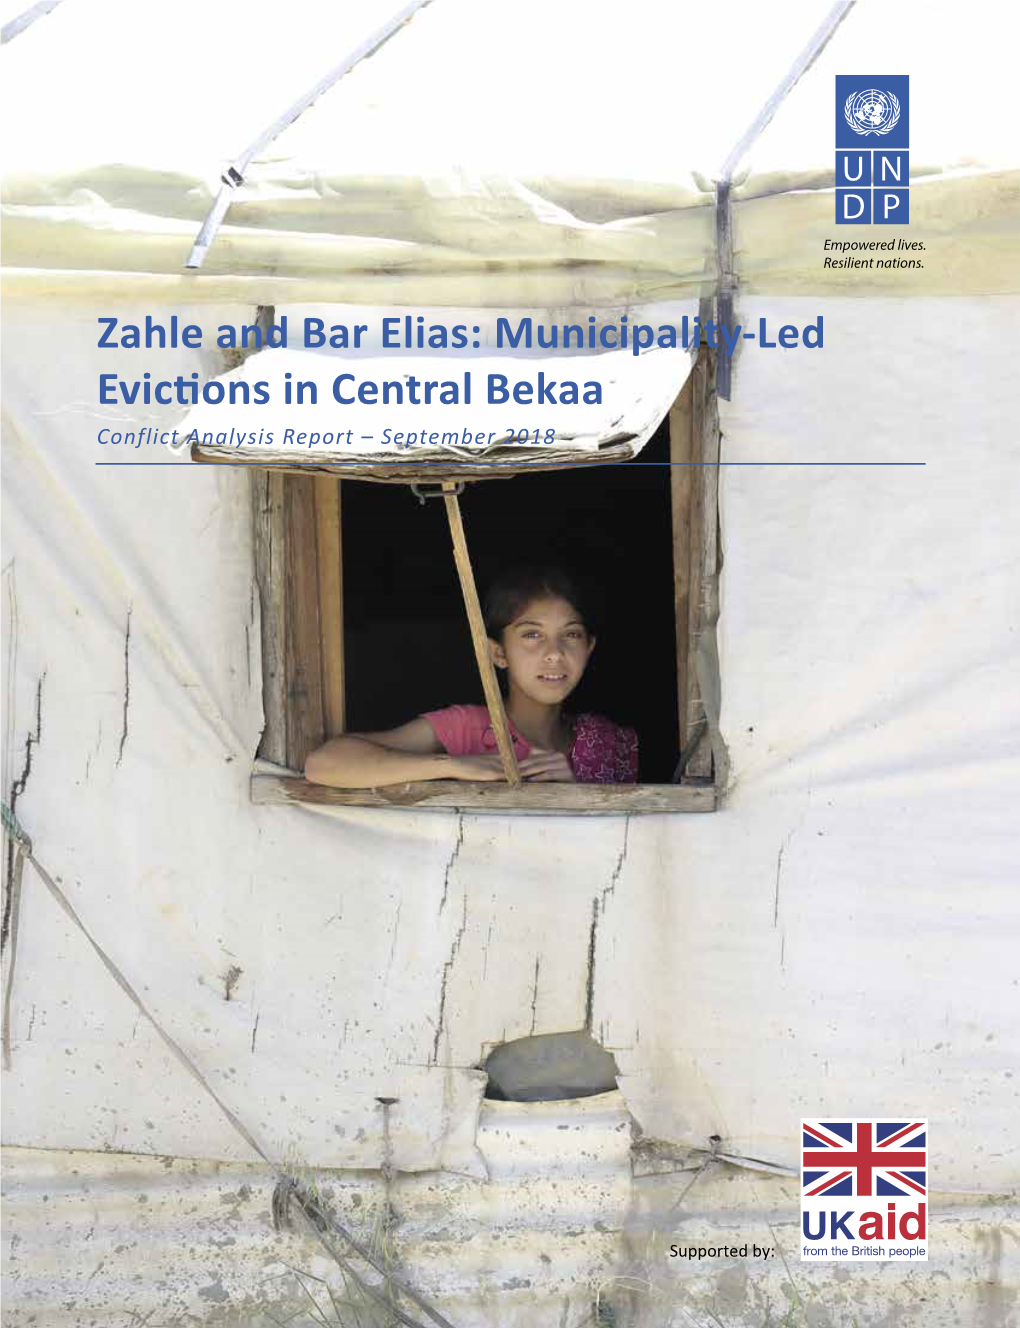 Zahle and Bar Elias: Municipality-Led Evictions in Central Bekaa Conflict Analysis Report – September 2018